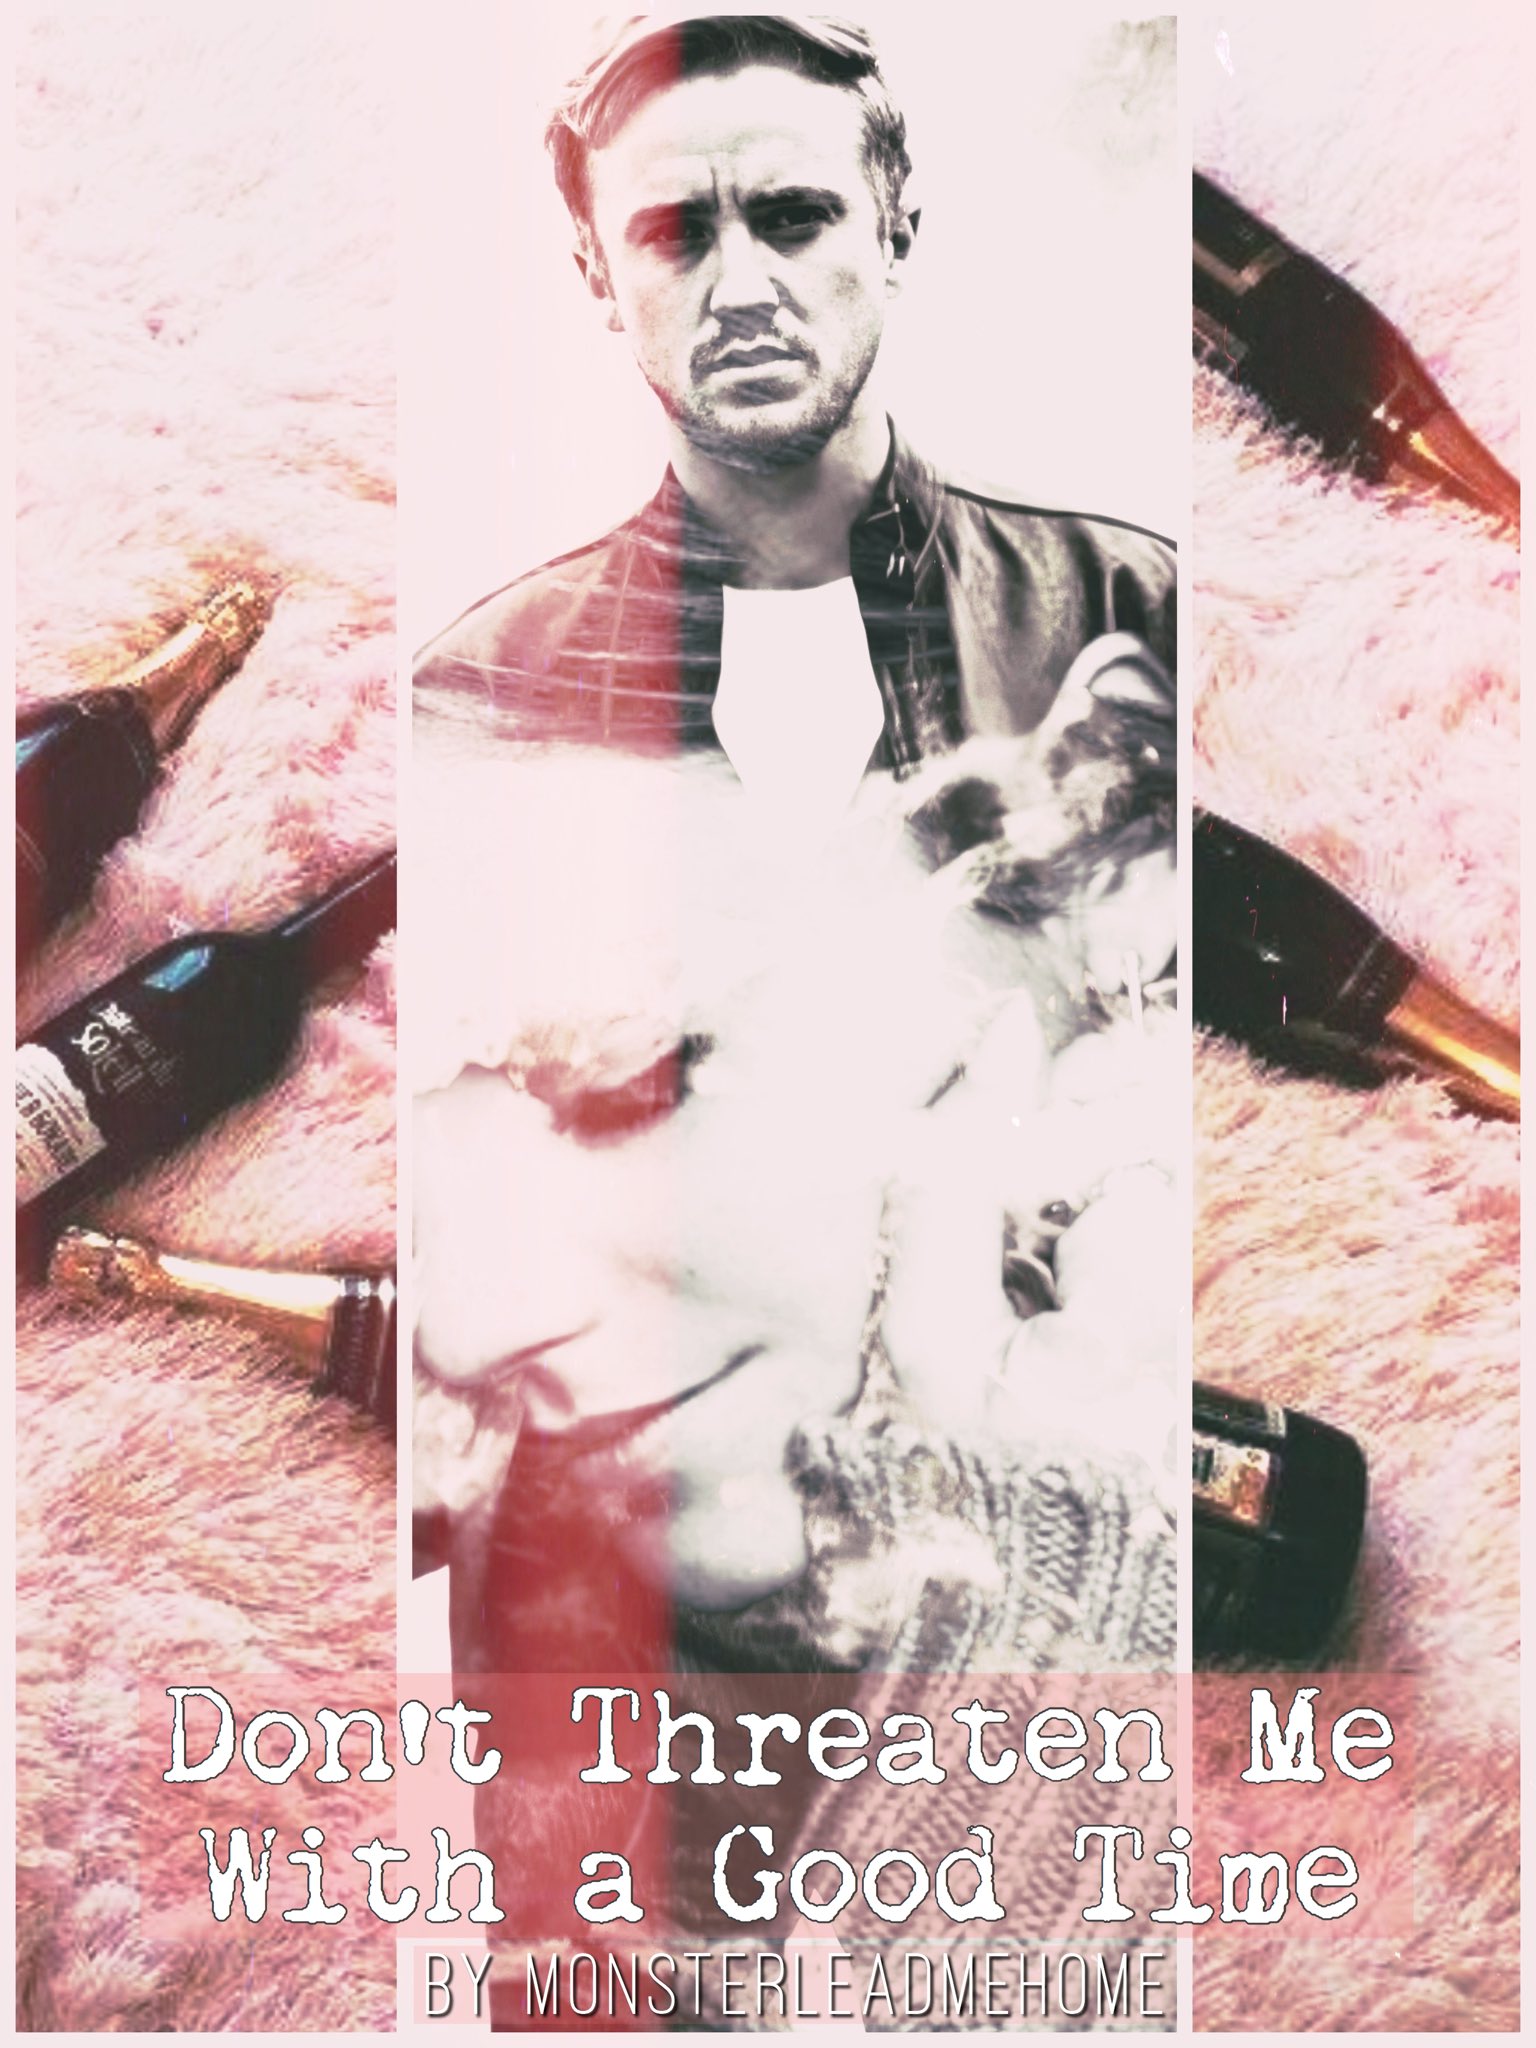 Don T Threaten Me With A Good Time Chapter 1 Monsterleadmehome Harry Potter J K Rowling Archive Of Our Own